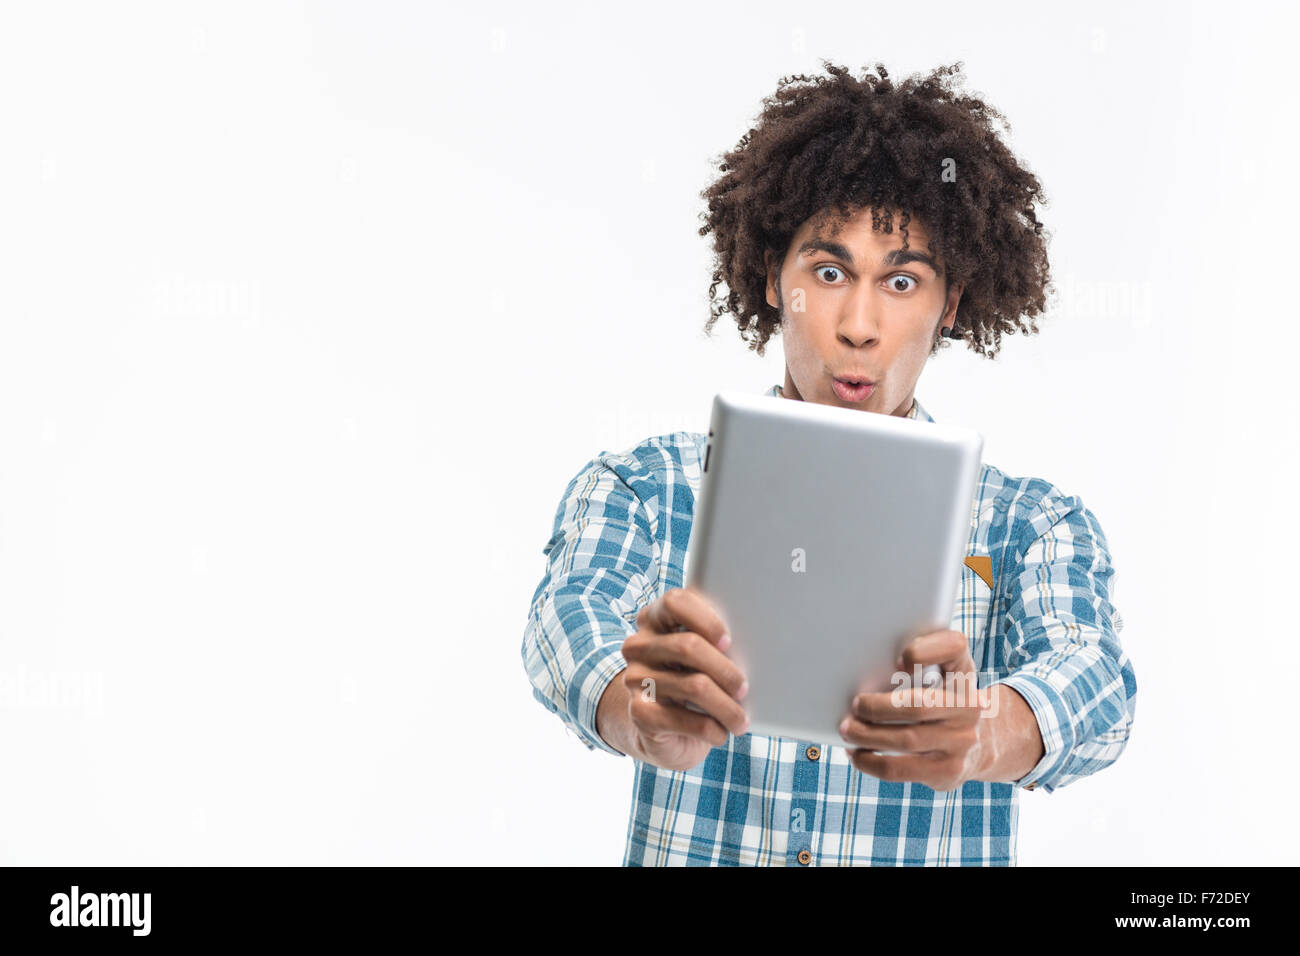 Portrait of a funny afro american man using tablet computer isolated on a white background Stock Photo